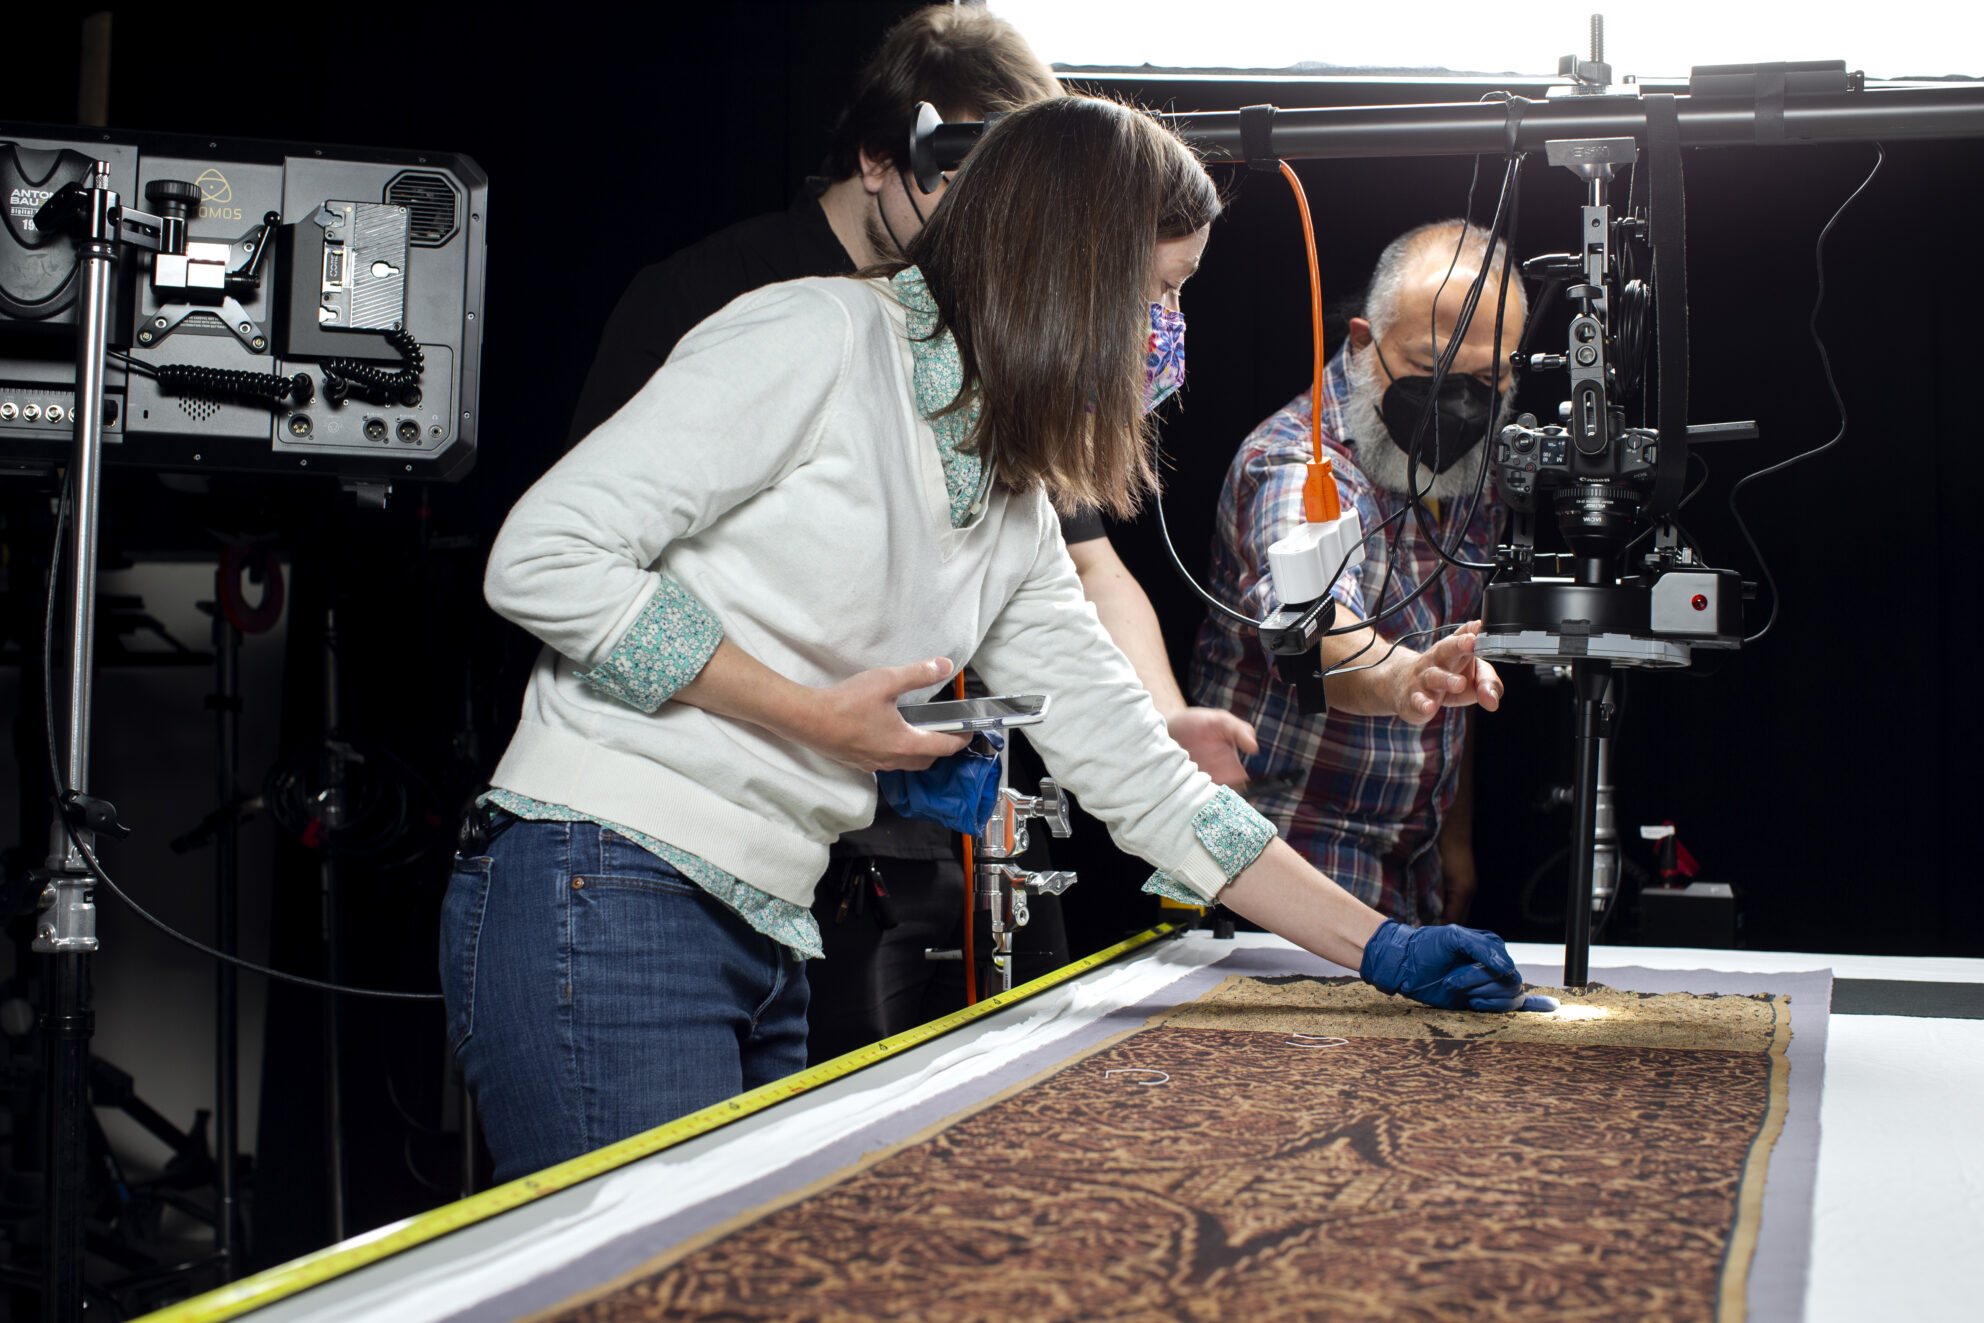 The team works together to prepare an object from the Gregg for image capture